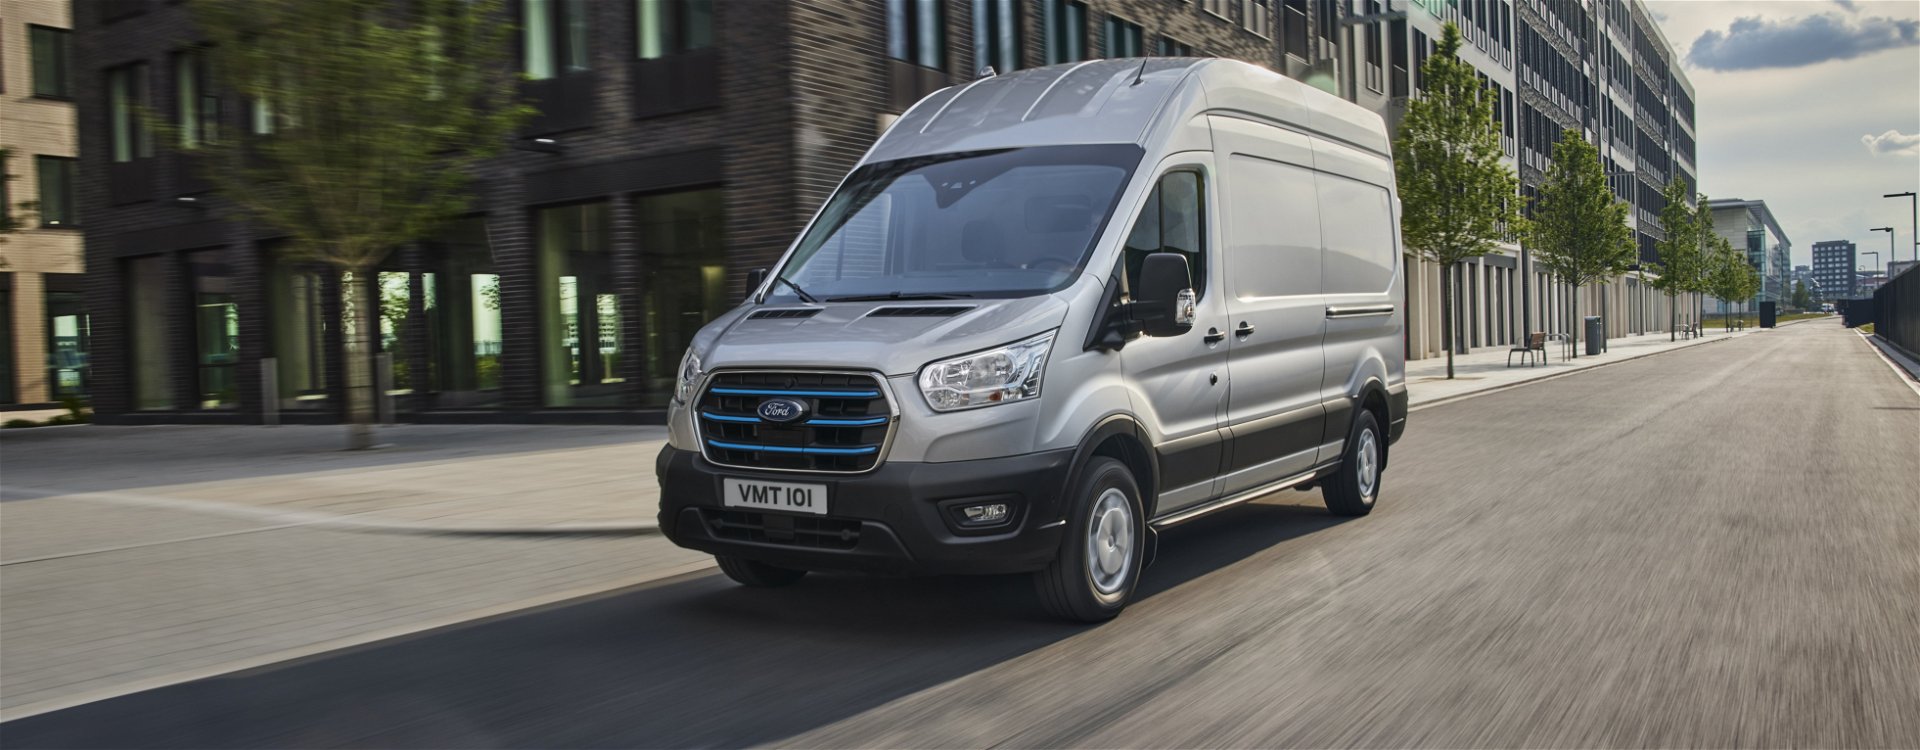 Grey Ford E-Transit electric van driving down the road